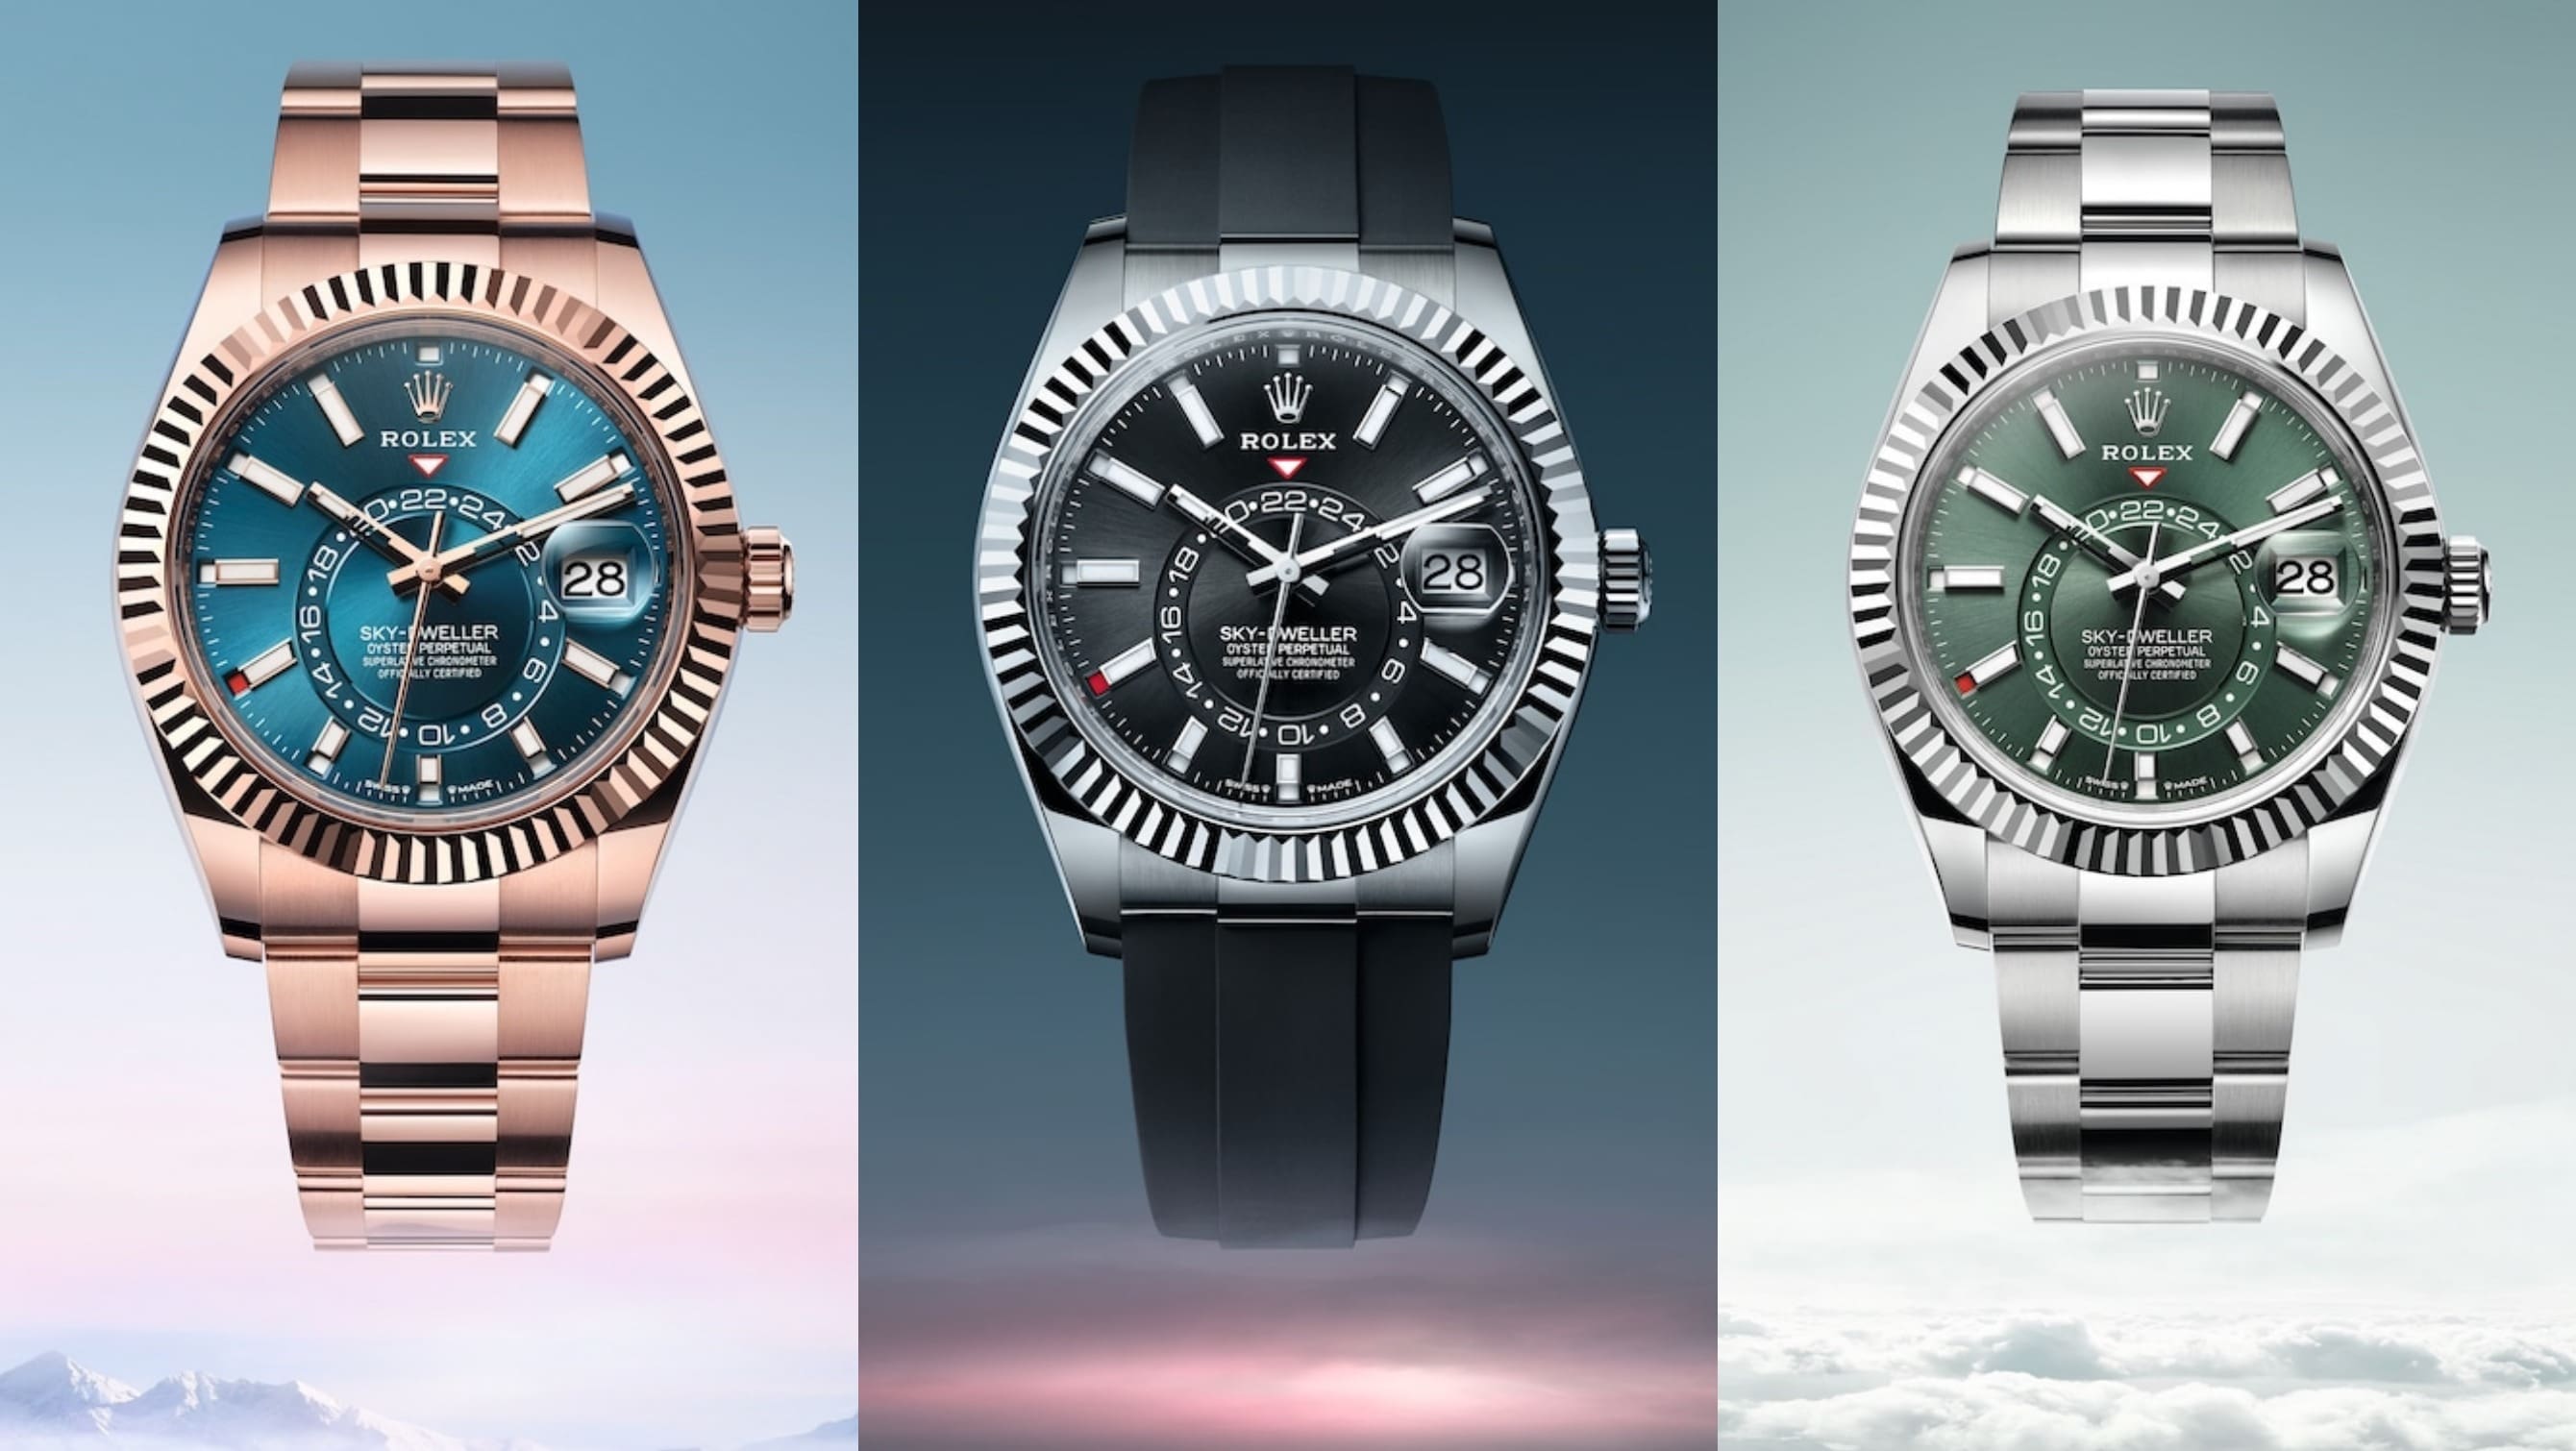 Rolex takes off with 3 new Sky-Dweller models